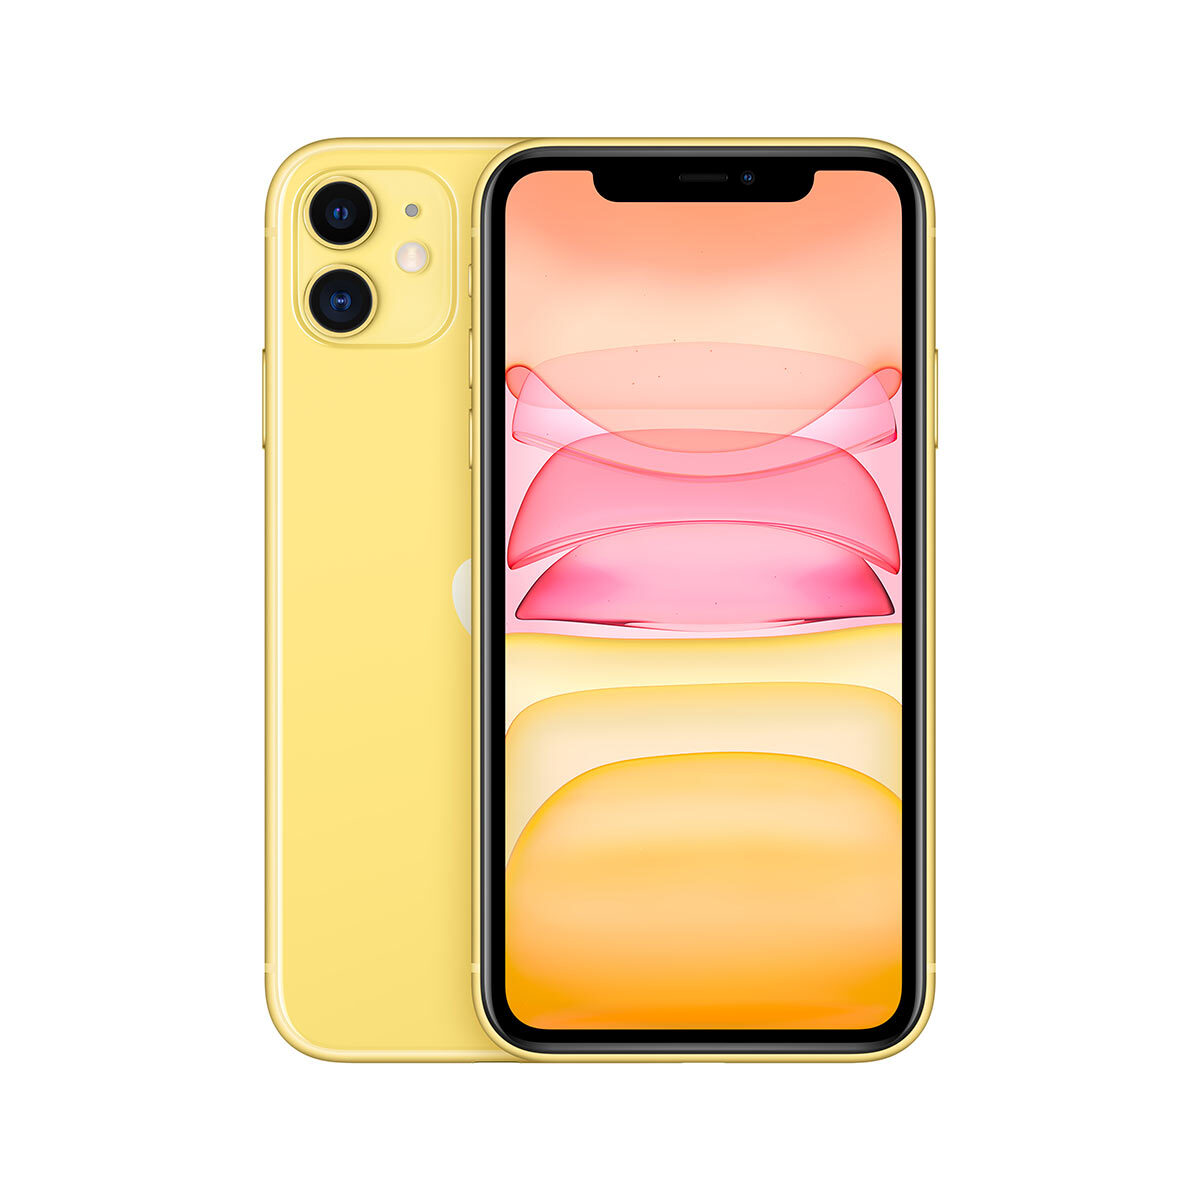 Buy Apple iPhone 11 128GB Sim Free Mobile Phone in Yellow, MHDL3B/A at costco.co.uk